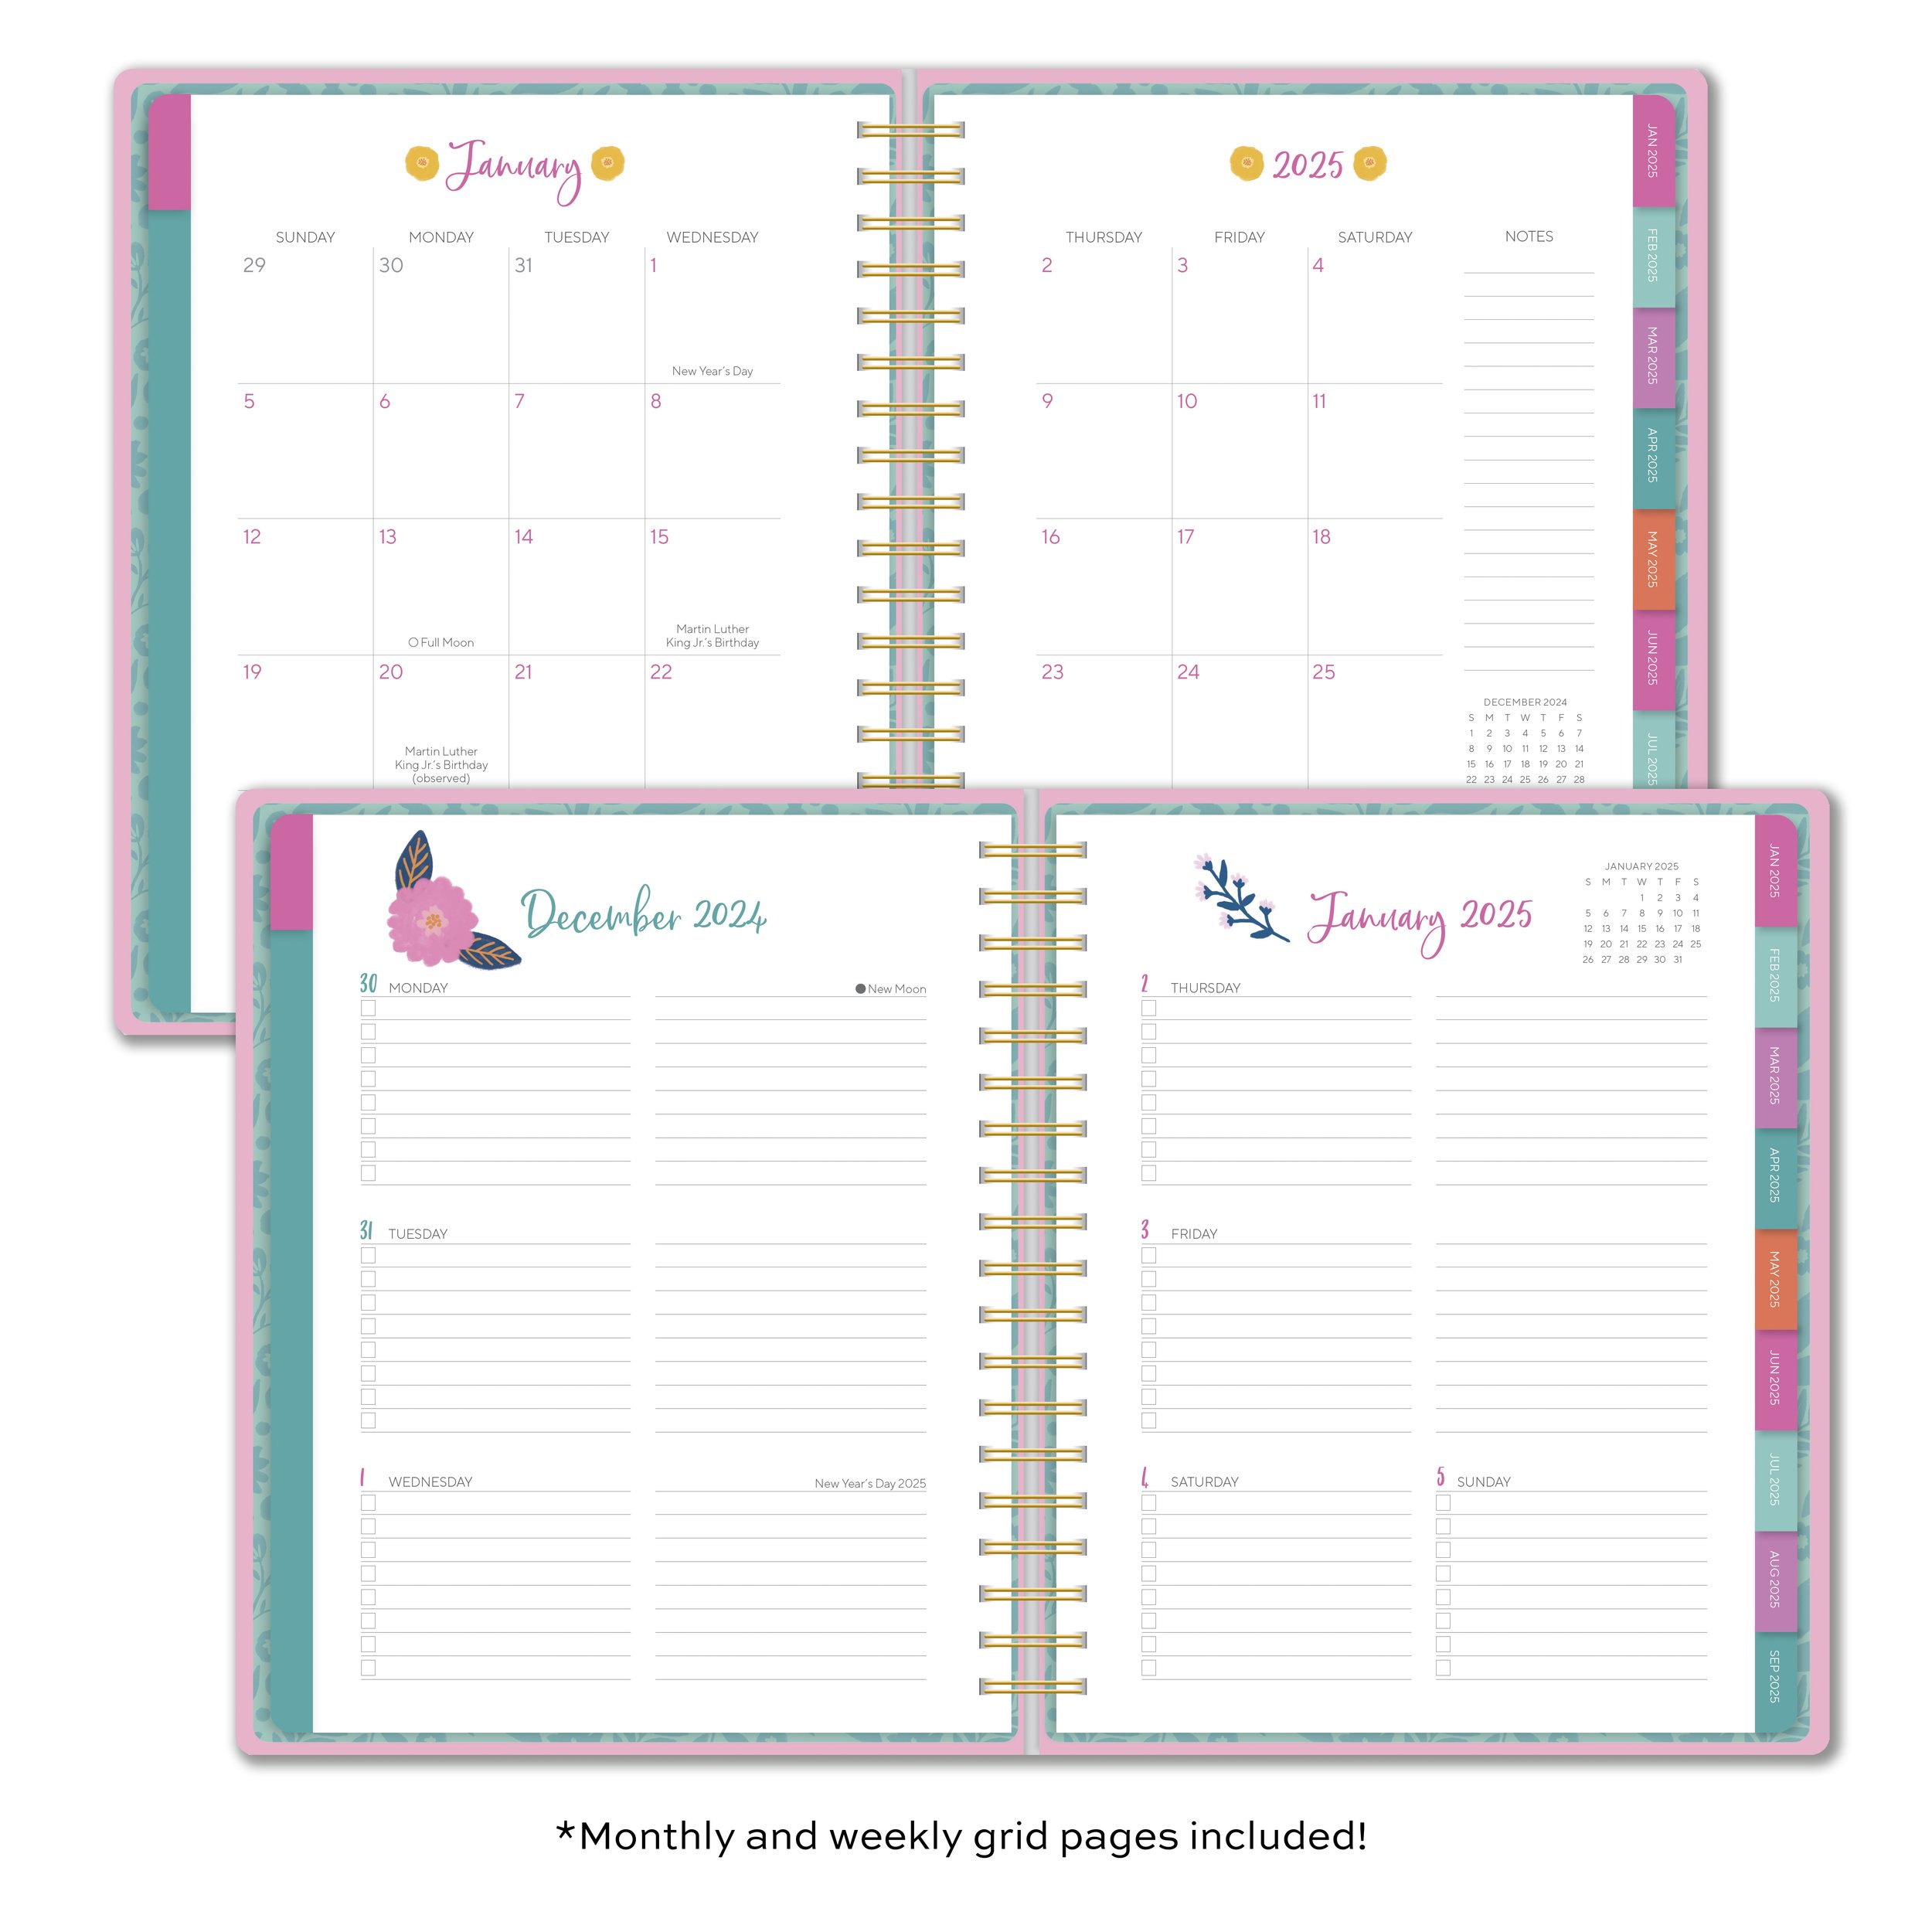 CHL-4209 Jess Phoenix_2025 Deluxe Planner Interior Pages.jpg